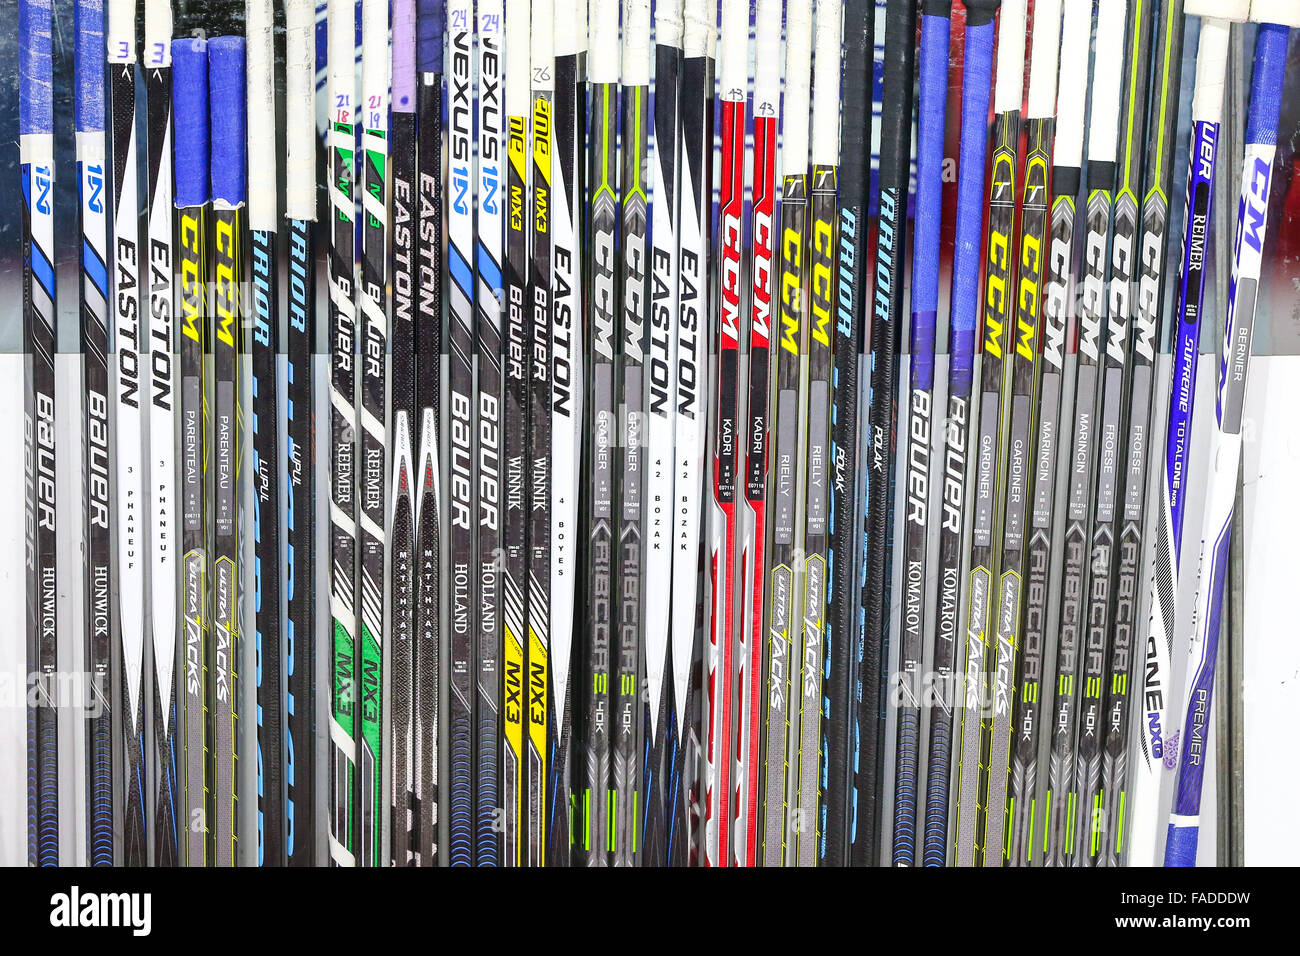 Toronto Maple Leafs hockey sticks during the NHL game between the Toronto Maple Leafs and the Carolina Hurricanes at the PNC Arena. Stock Photo